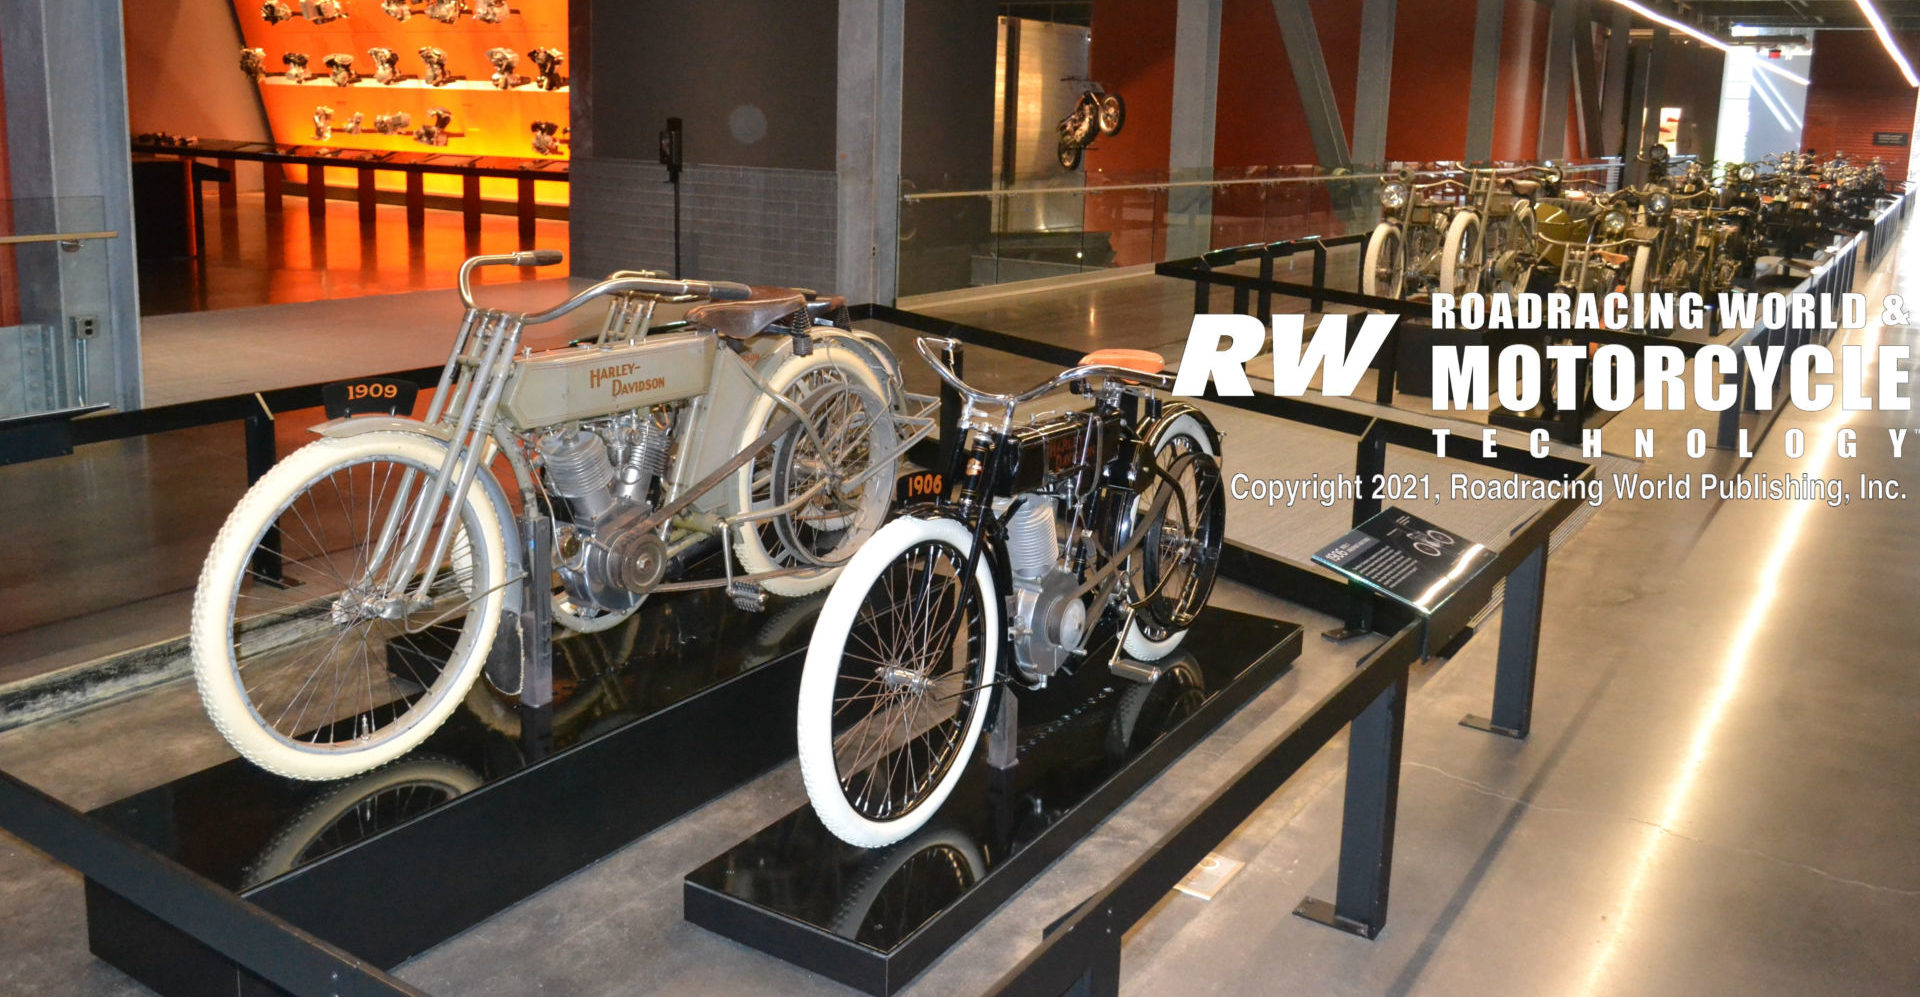 Whats Happening At The Harley-Davidson Museum In December?